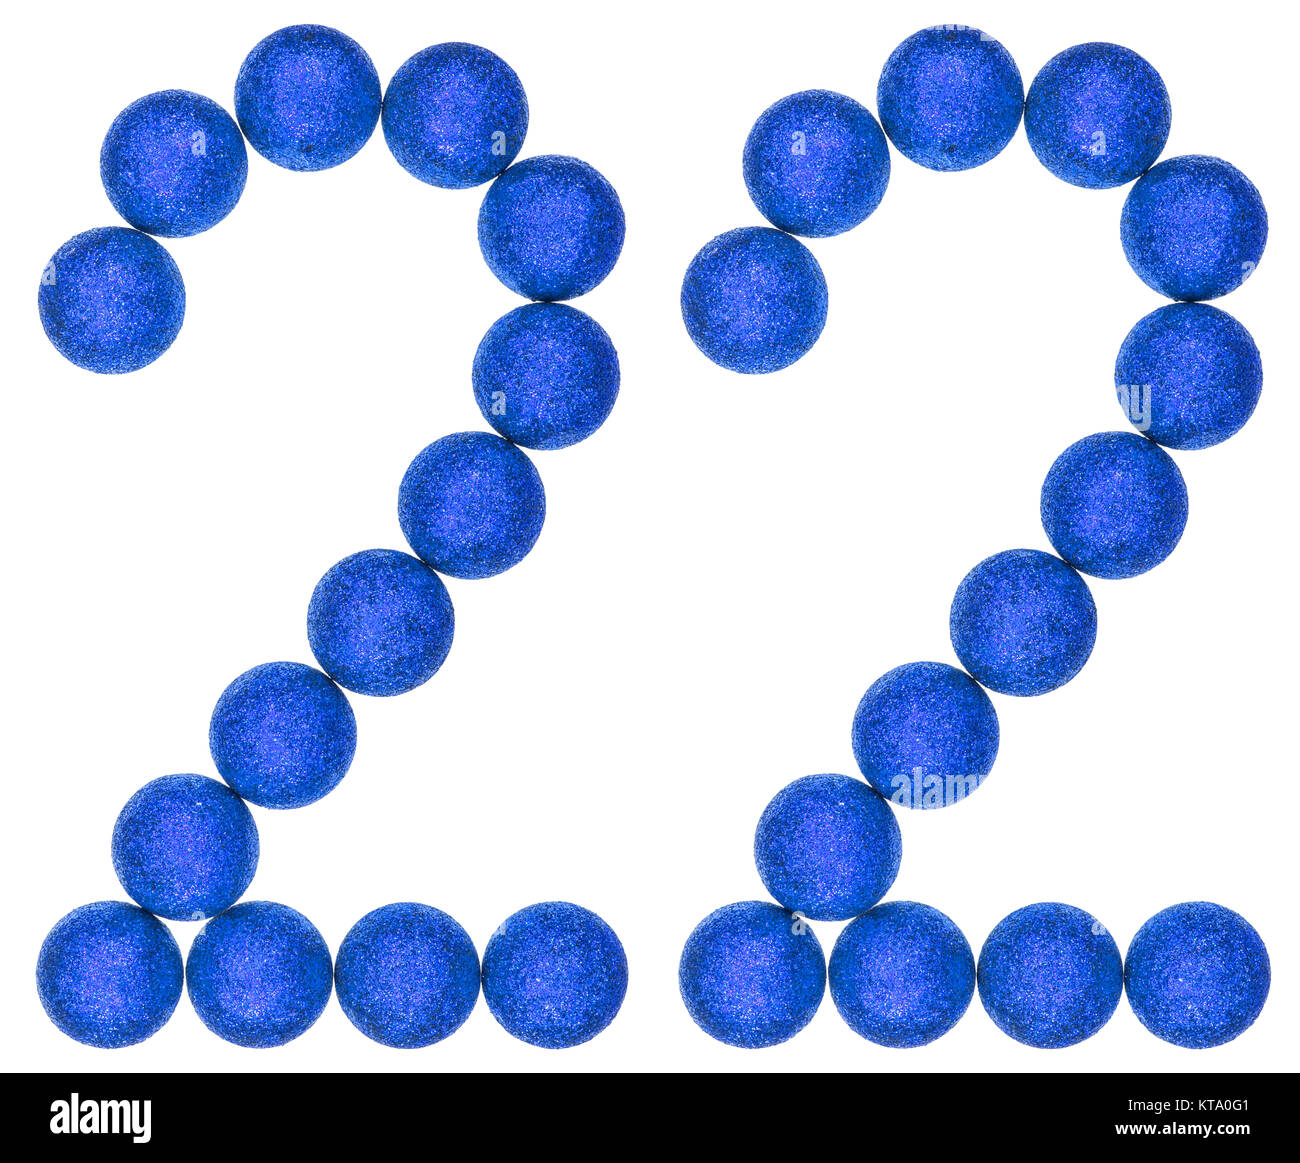 Numeral 22, twenty two, from decorative balls, isolated on white background Stock Photo